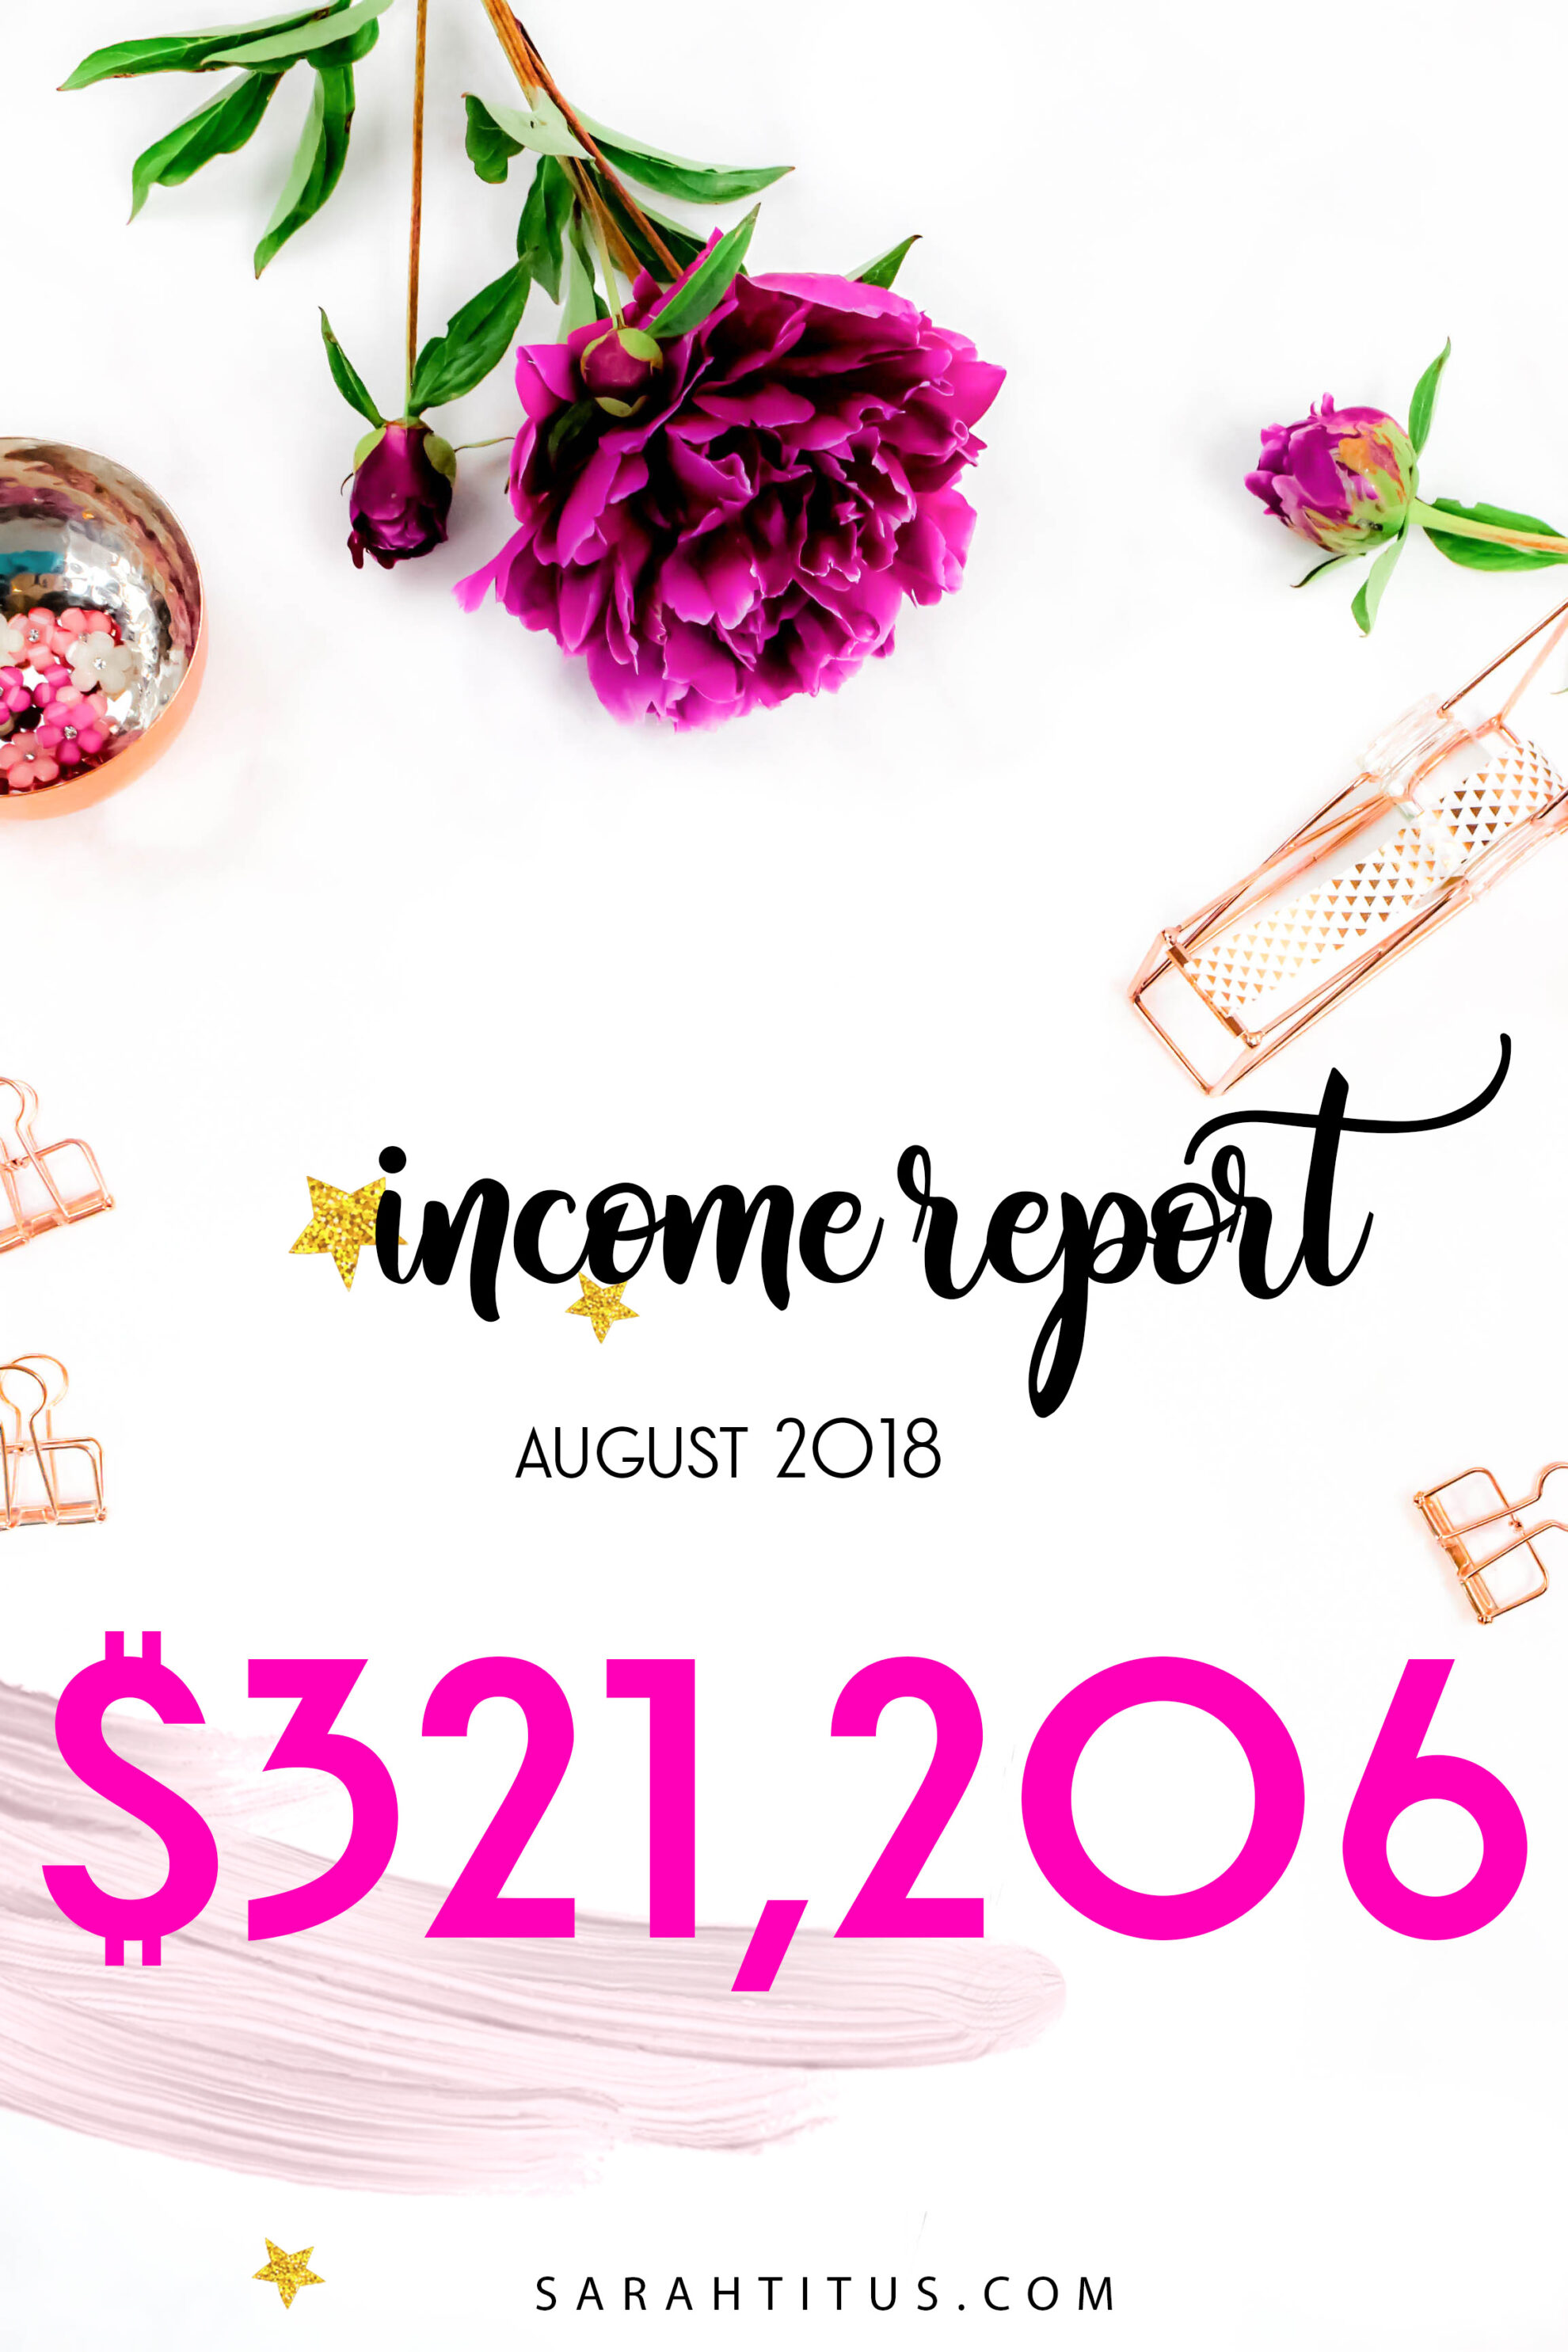 Before I started blogging, I was making $18k/YEAR. Now, I make $2.4 million dollars a year in my online store! Check out my latest income report!!! #blogging #shopify #ecommerce #incomereports #shopifyincomereports